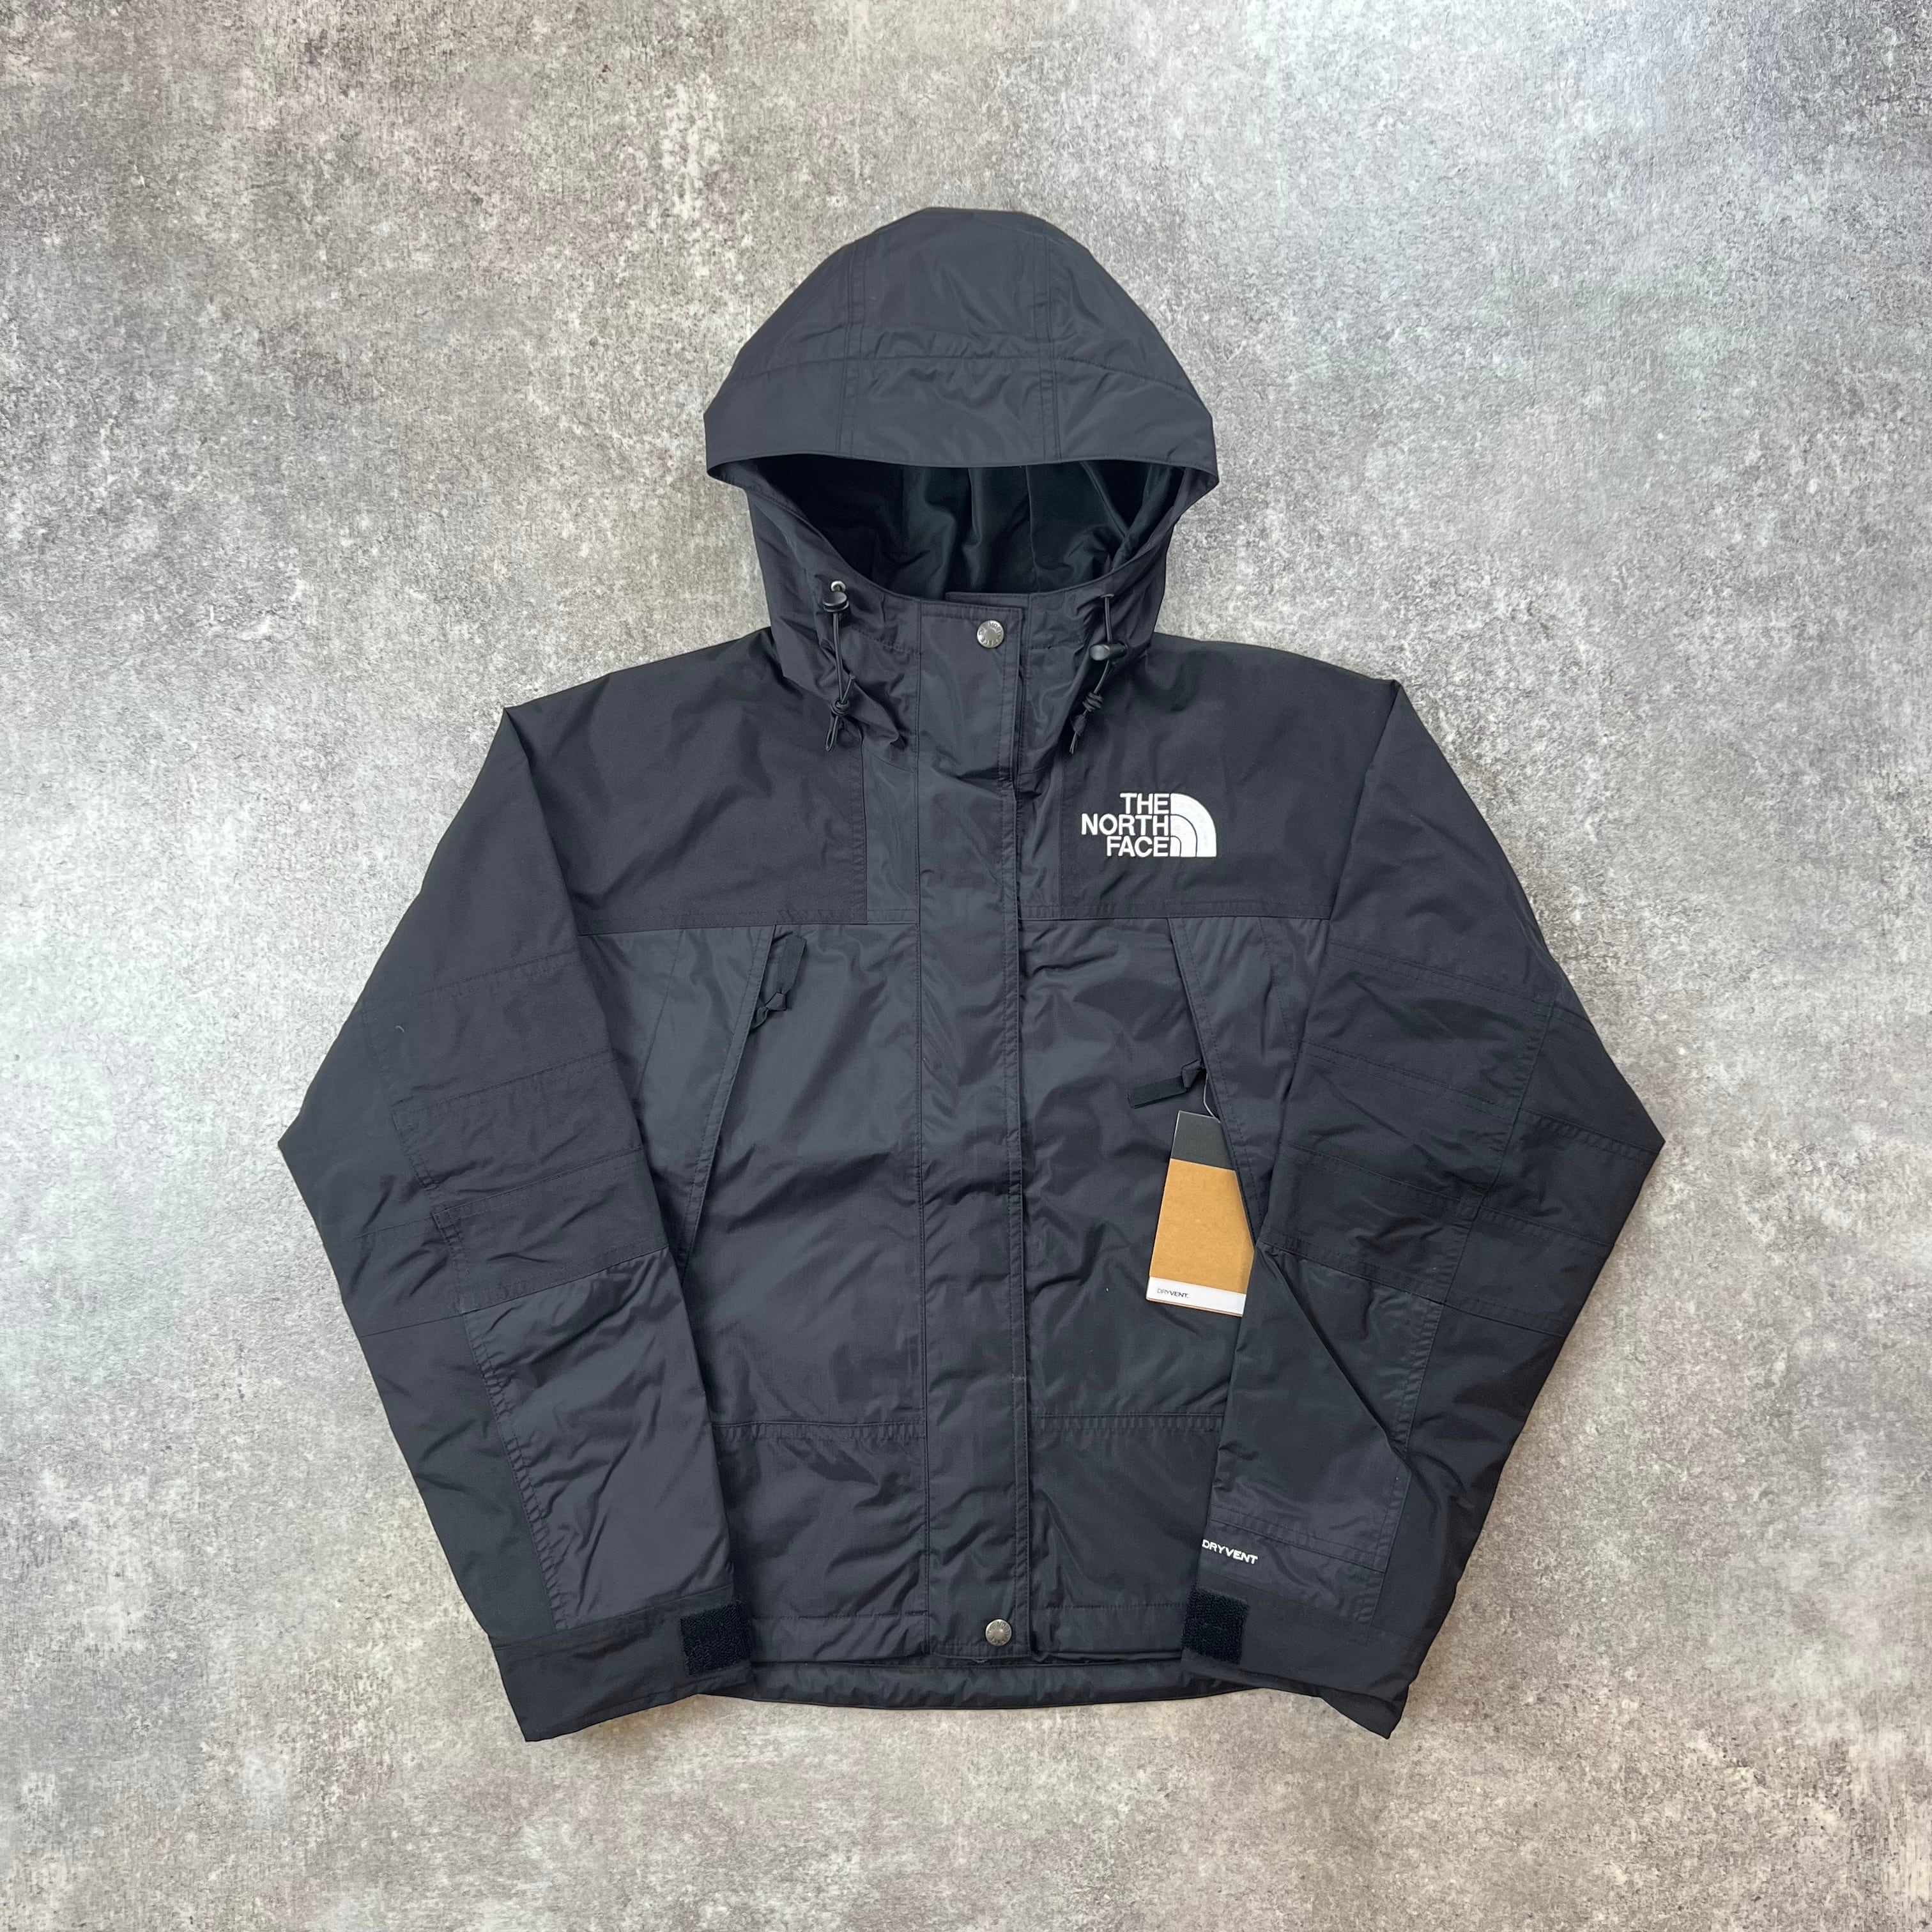 THE NORTH FACE / Women's k2rm dryvent jacket / TNF Black